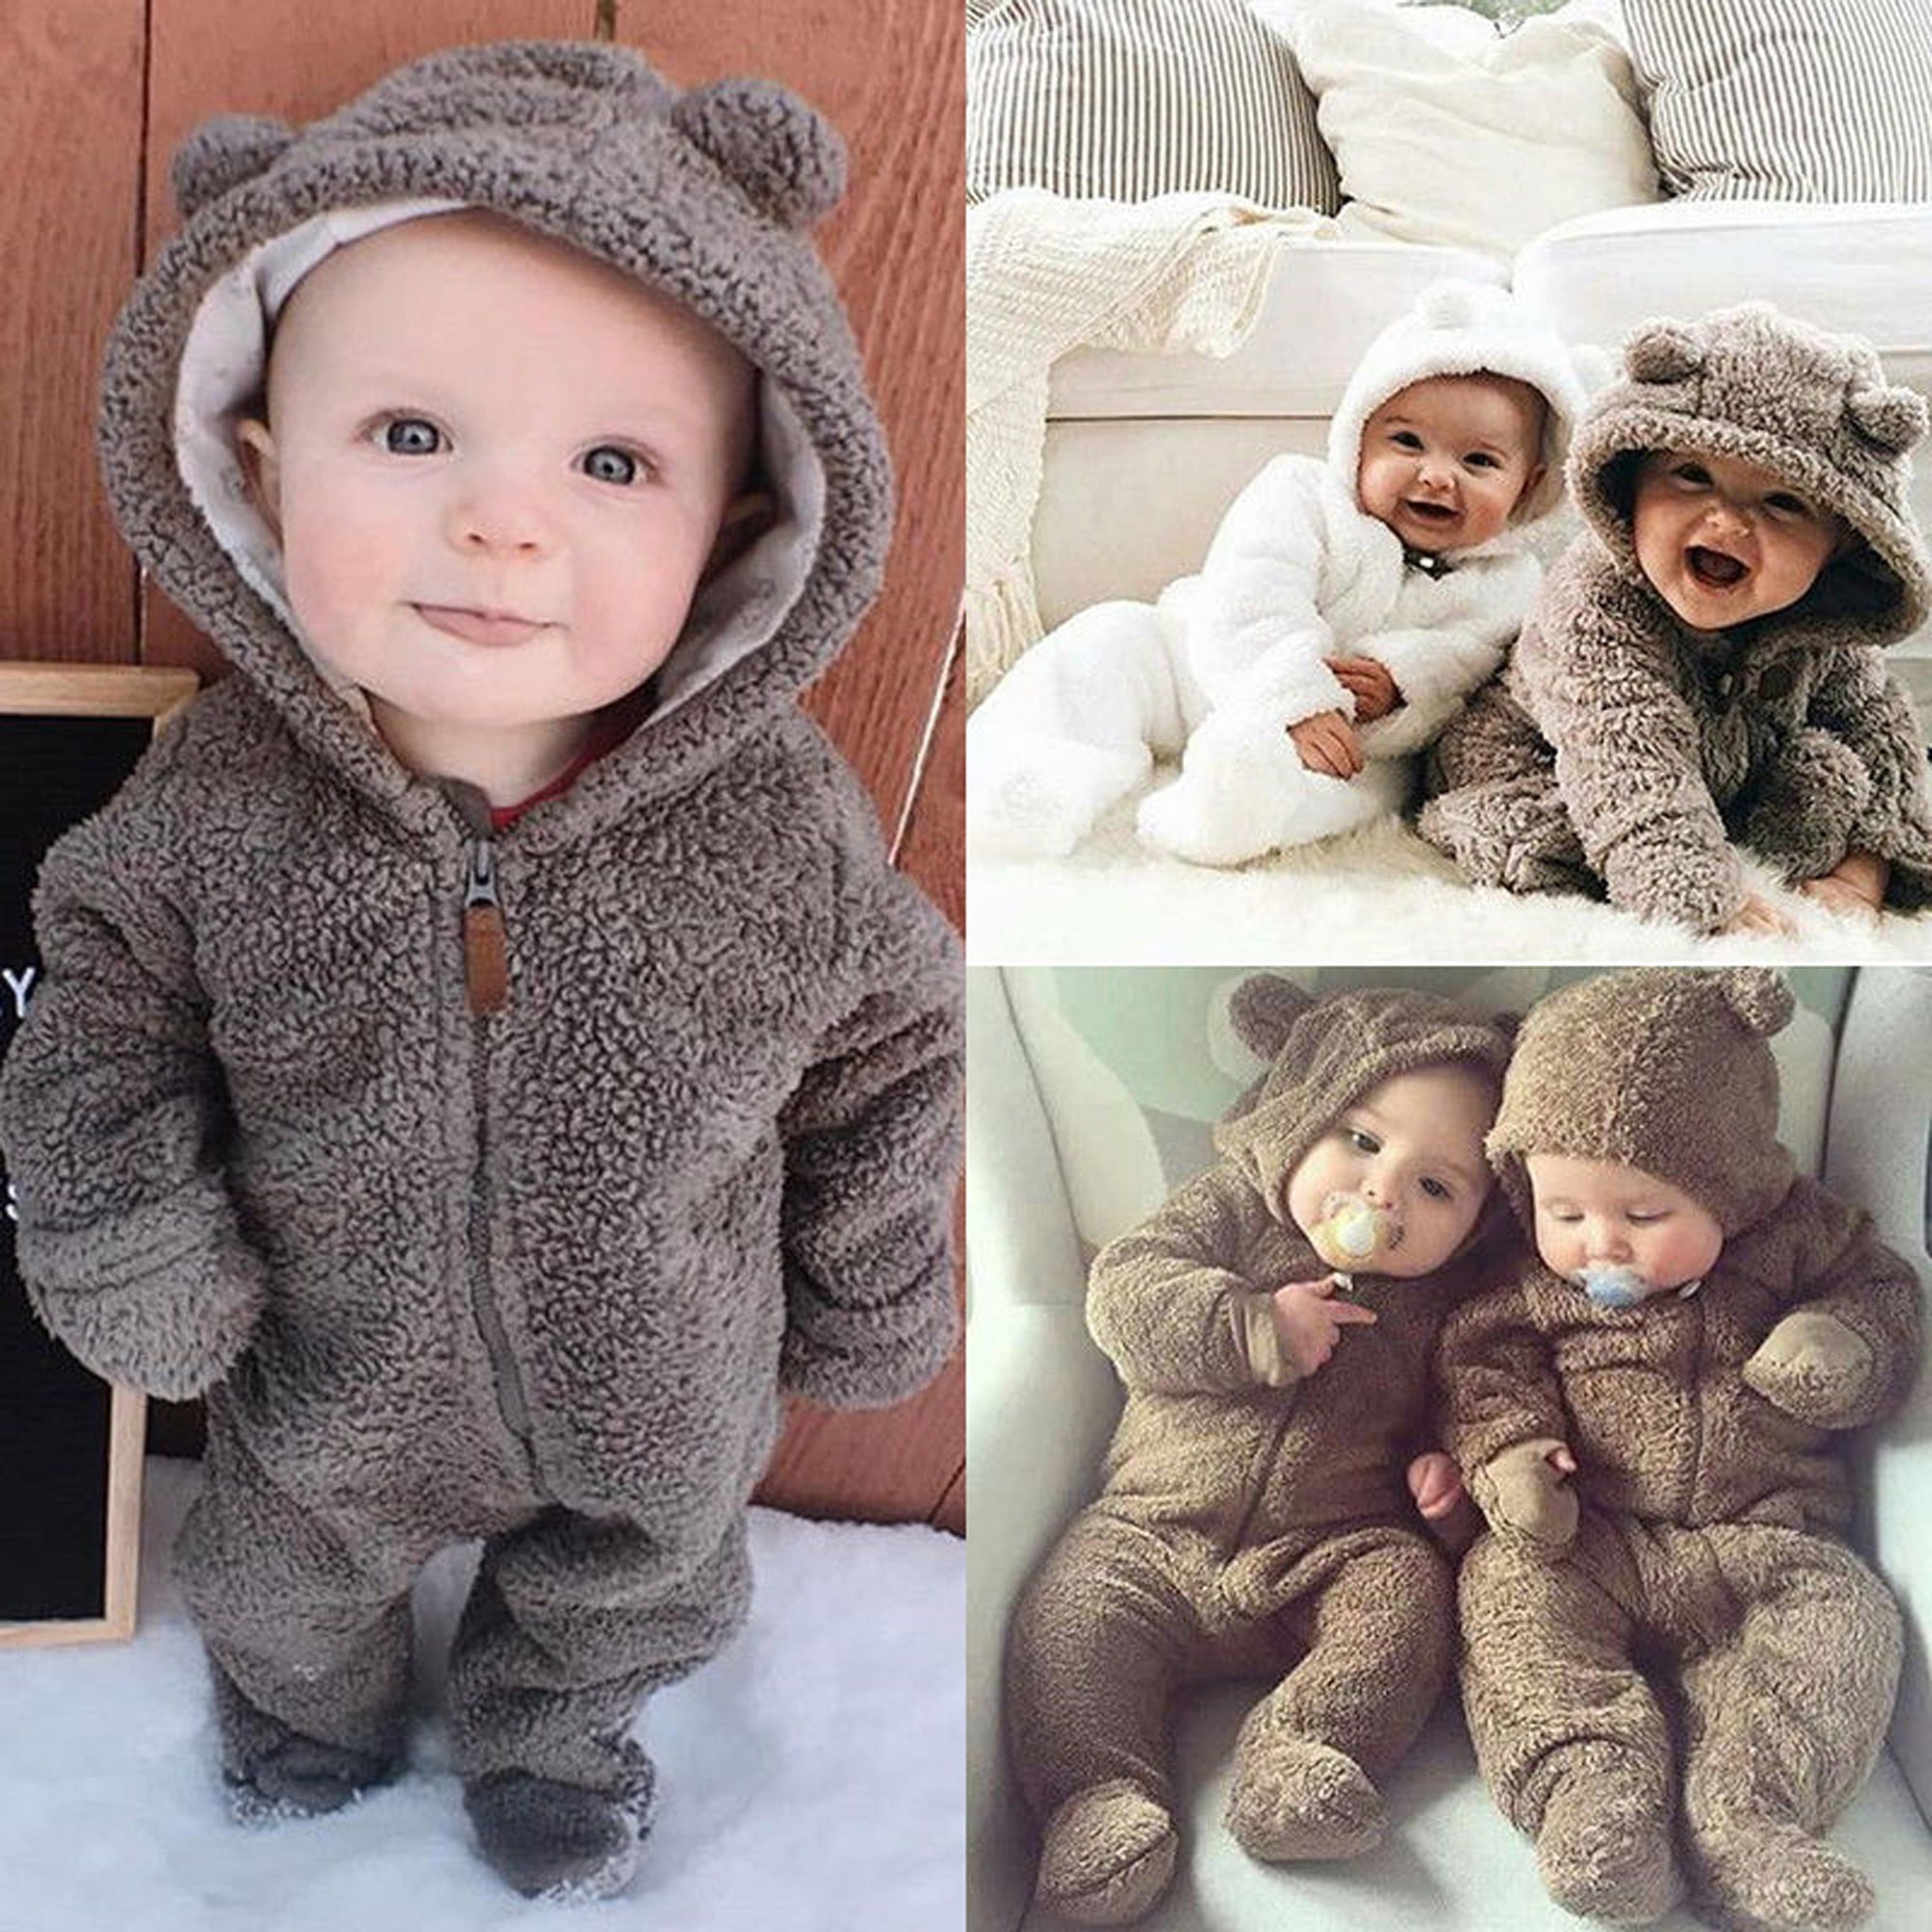 QbuYI 2019 Newborn Infant Baby Boy Girl Hooded Romper Jumpsuit Outfits Clothes 